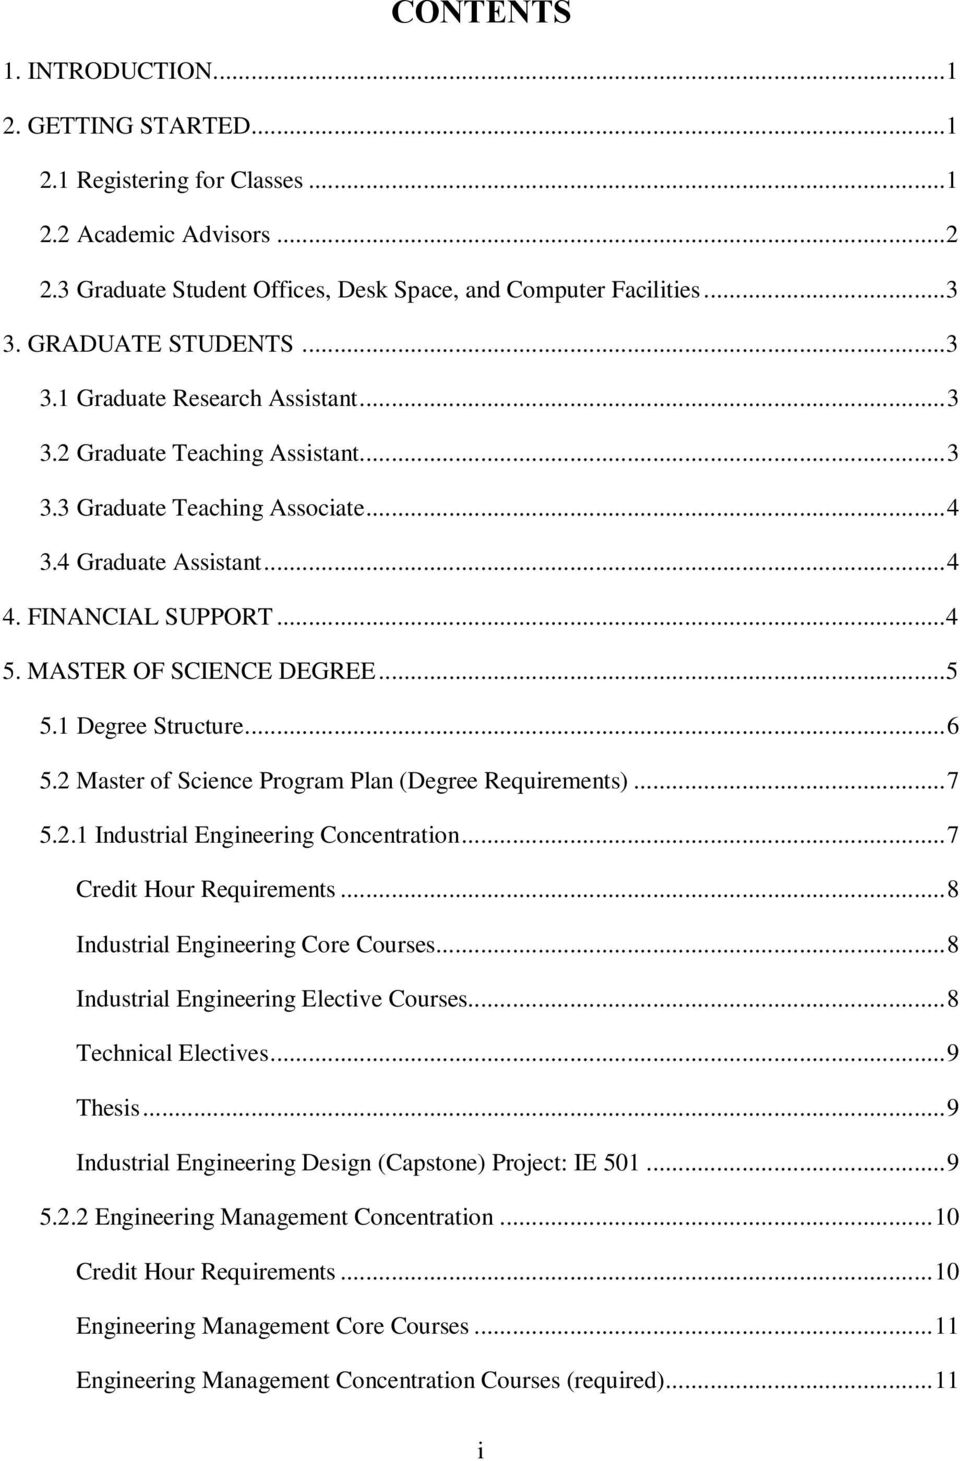 MASTER OF SCIENCE DEGREE...5 5.1 Degree Structure... 6 5.2 Master of Science Program Plan (Degree Requirements)... 7 5.2.1 Industrial Engineering Concentration... 7 Credit Hour Requirements.